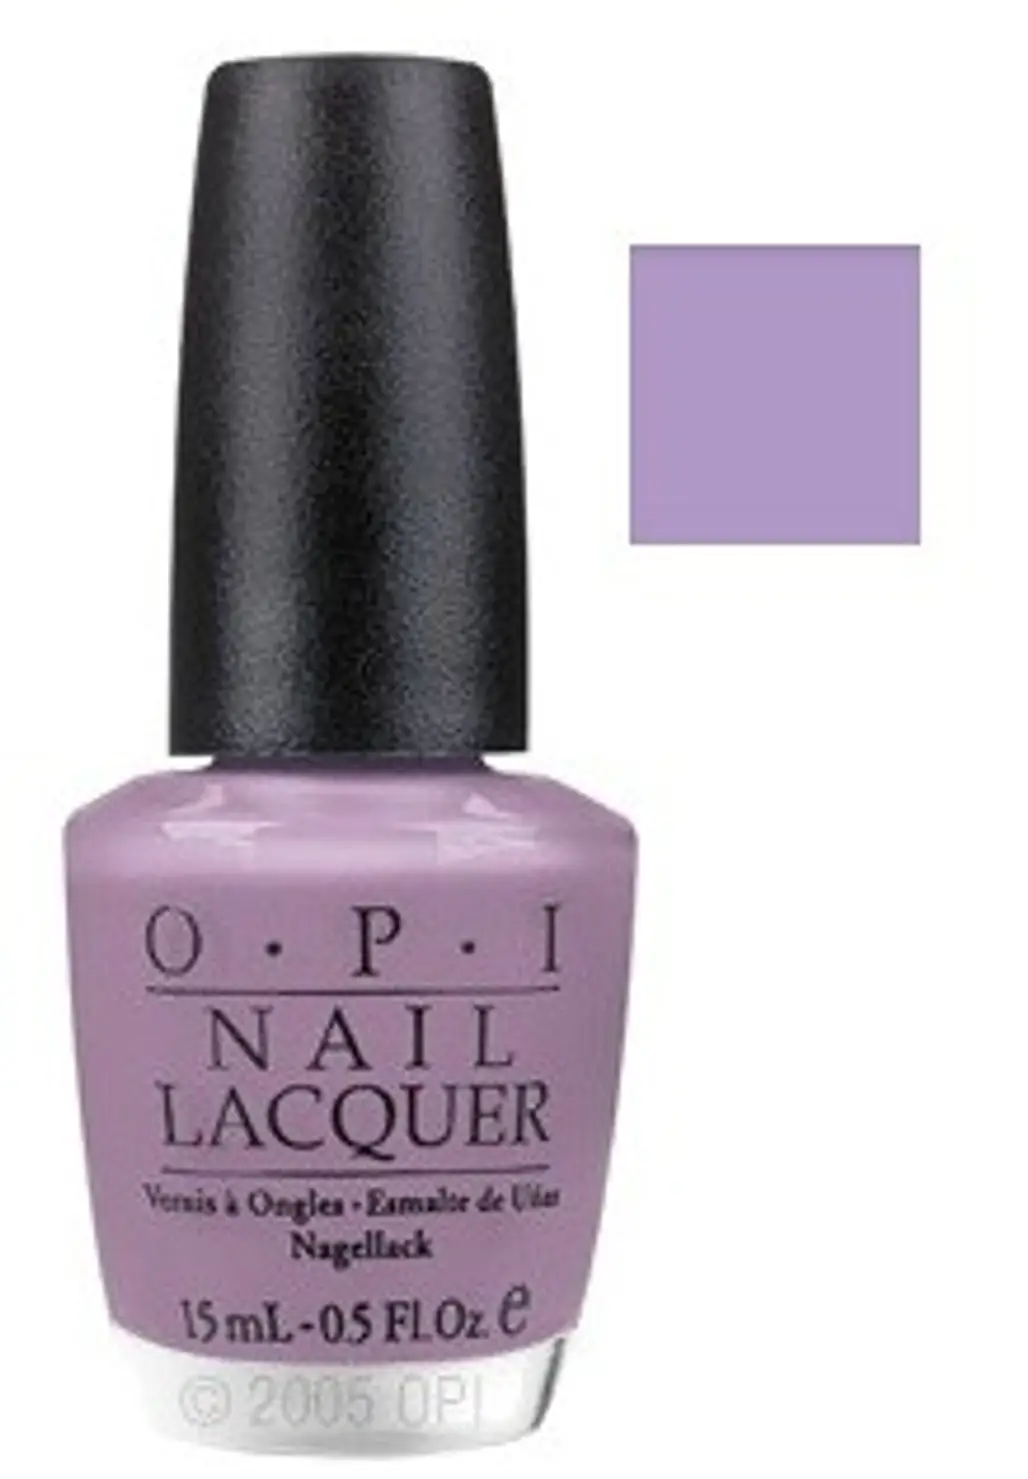 OPI do You Lilac It?